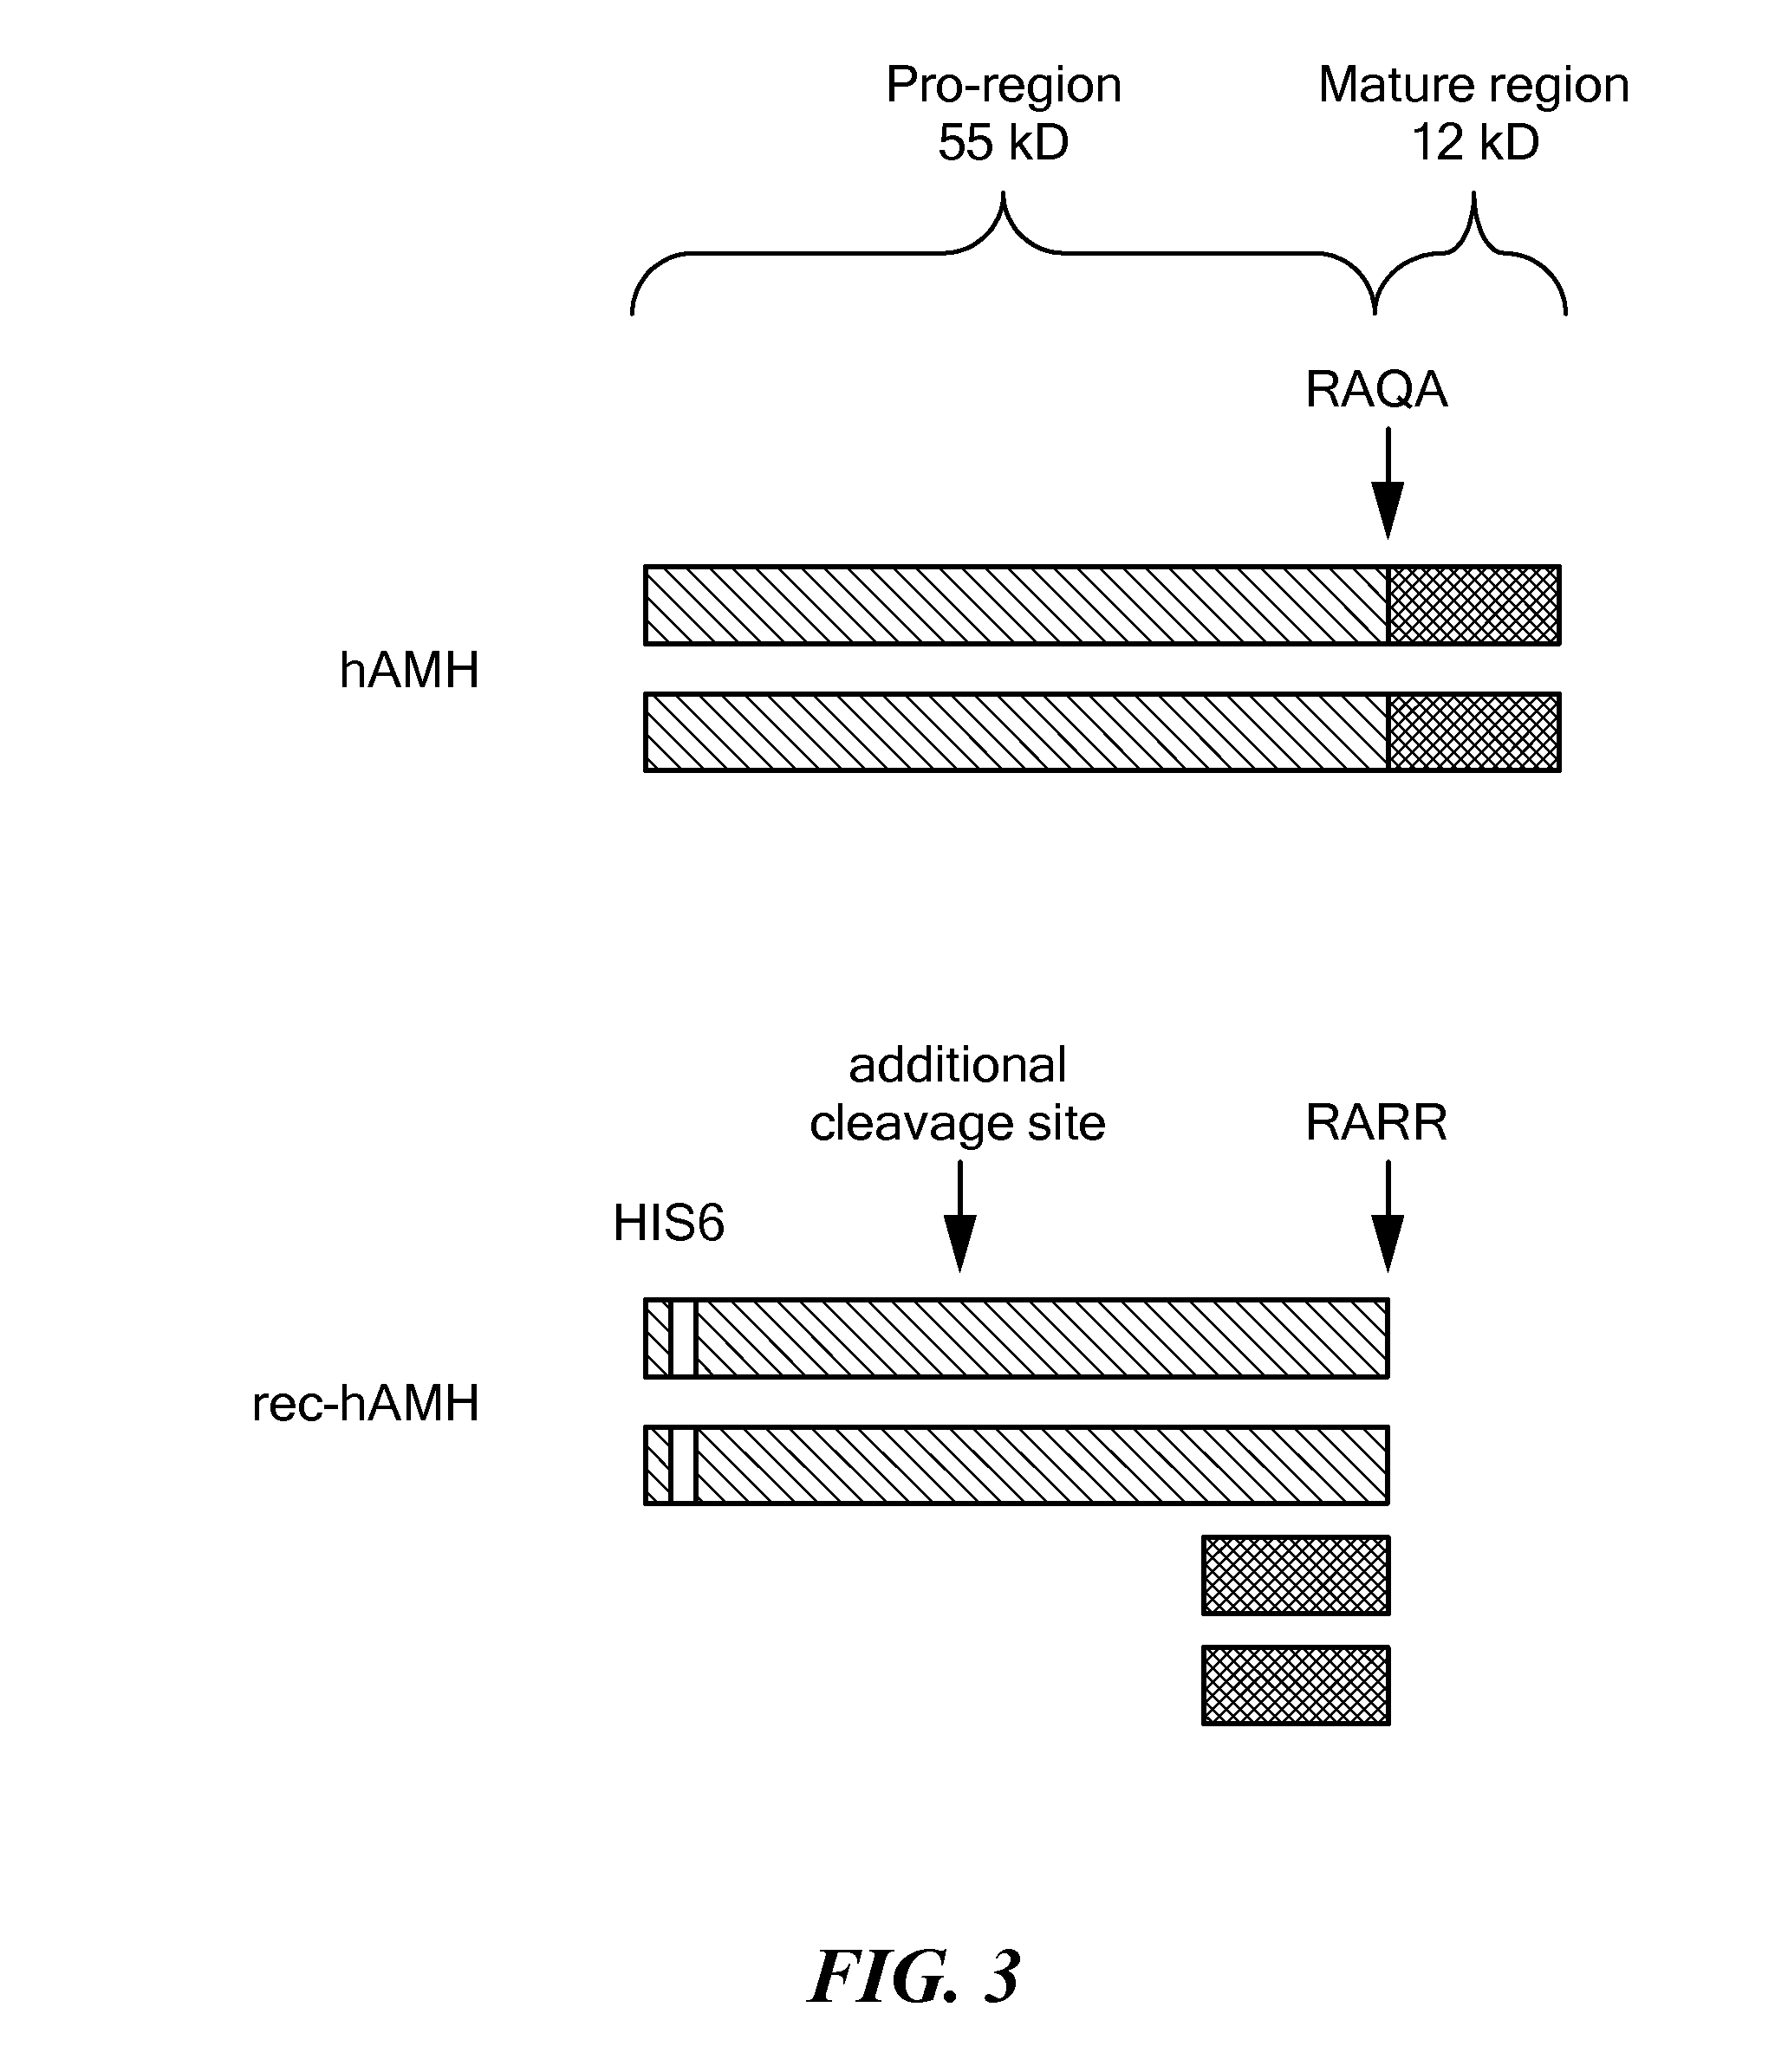 Antibody Compositions and Immunoassay Methods to Detect Isoforms of Anti-Müllerian Hormone